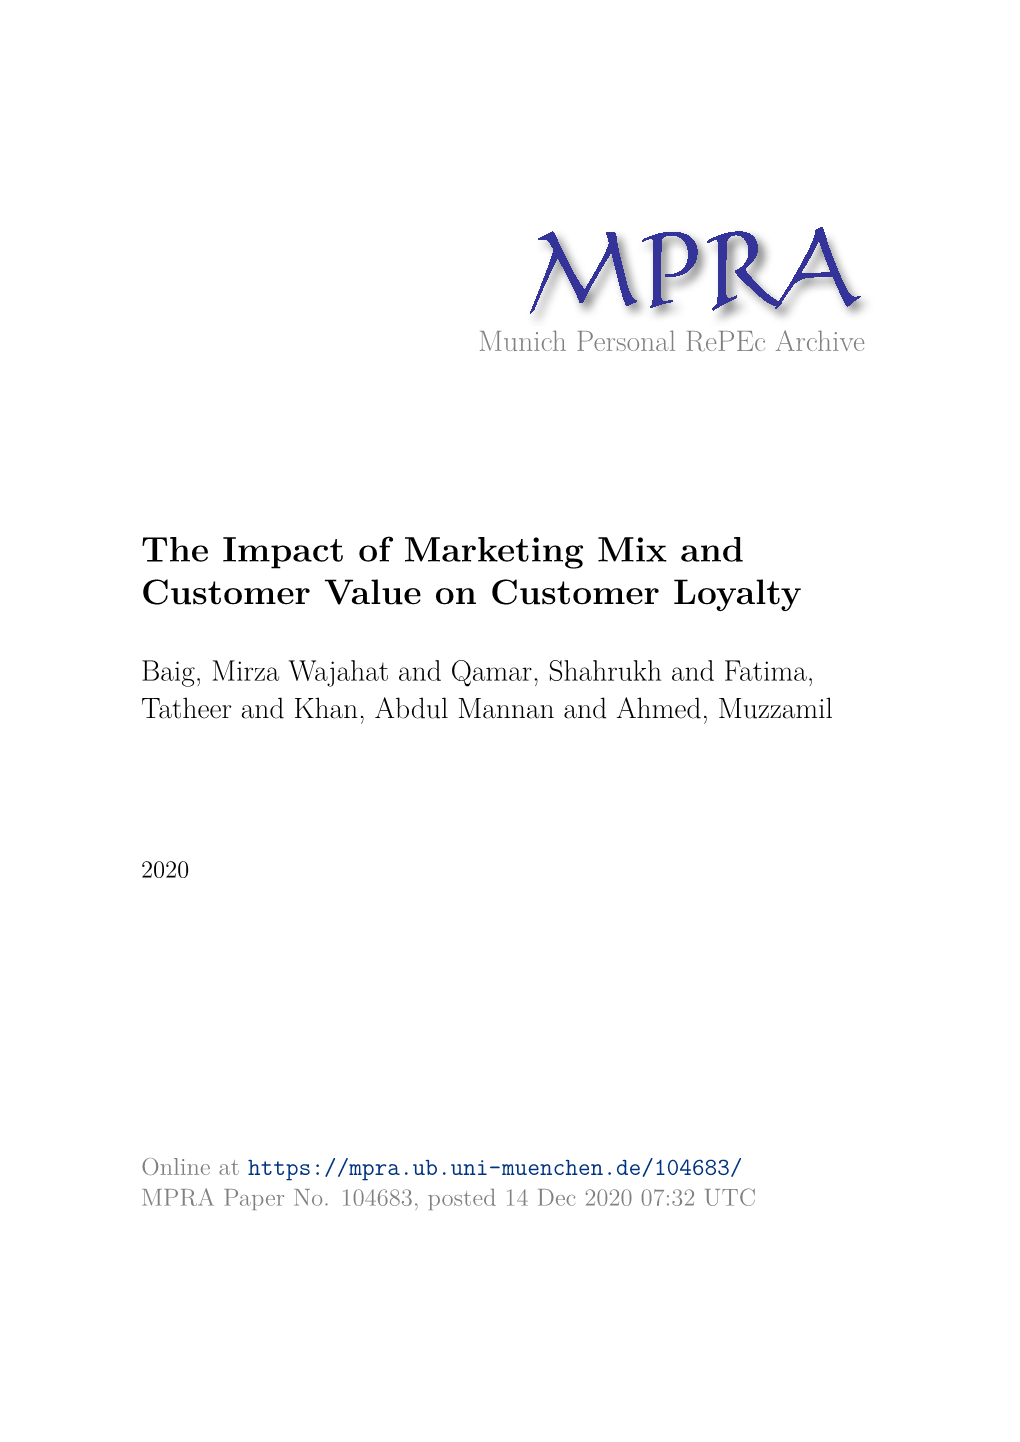 The Impact of Marketing Mix and Customer Value on Customer Loyalty